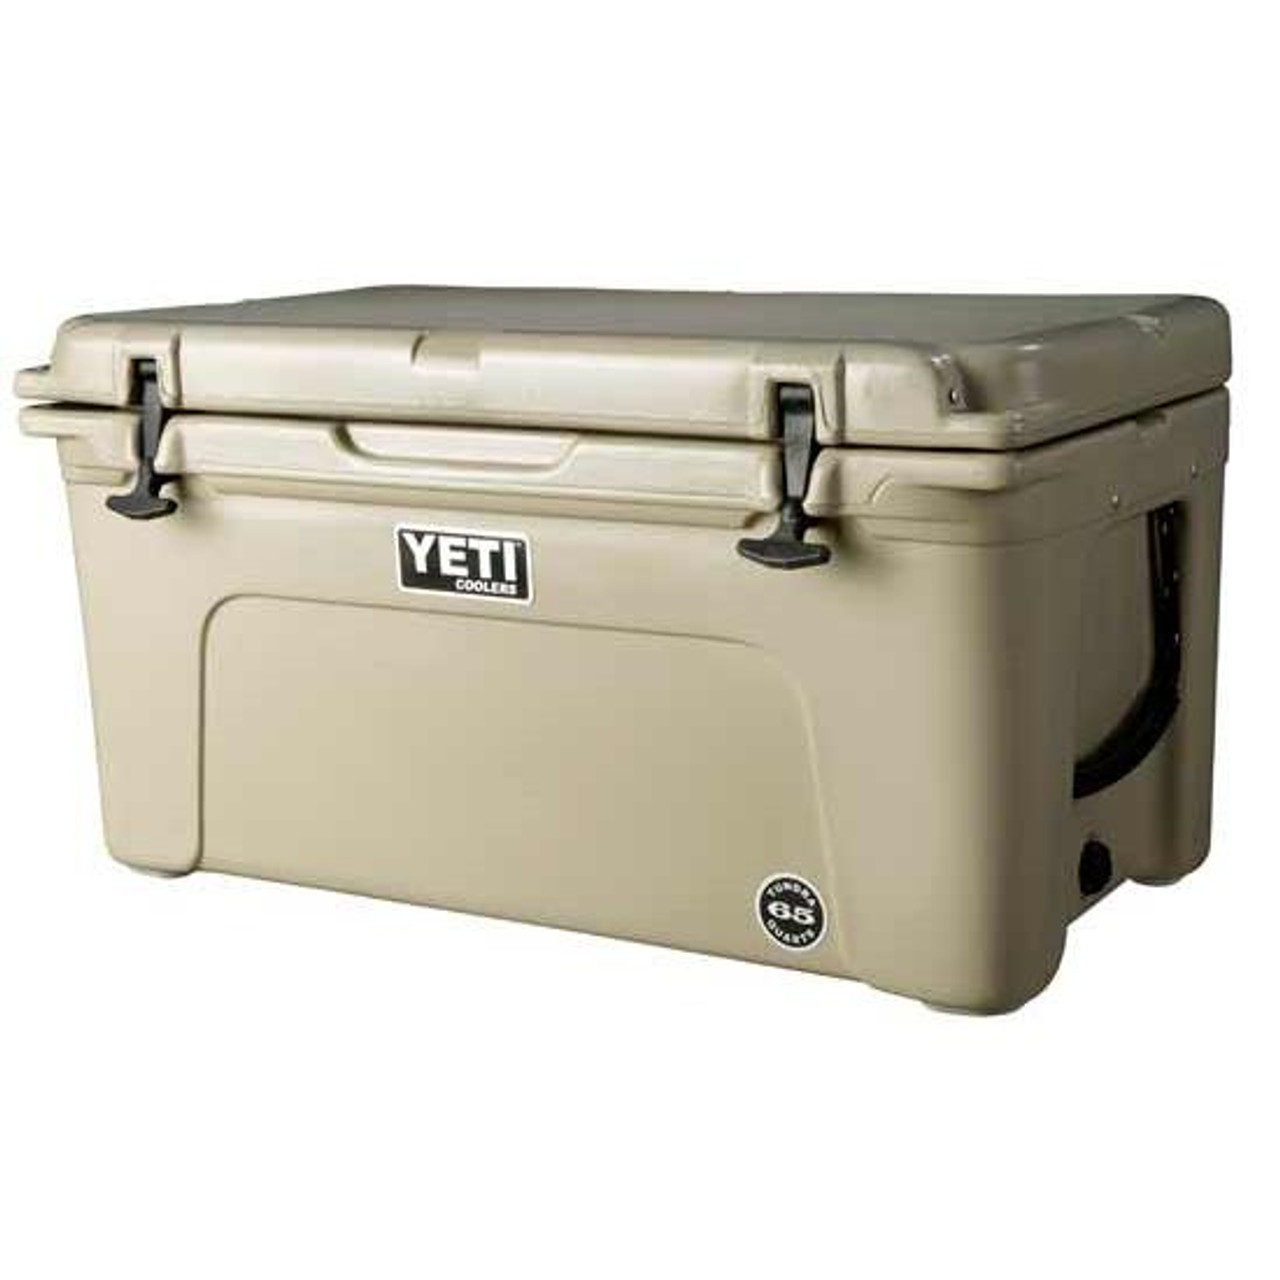 https://cdn11.bigcommerce.com/s-70mih4s/images/stencil/1280x1280/products/9154/18567/Yeti-YT65T-Tundra-65-Quart-Cooler-01439453066_image1__48575.1392823025.jpg?c=2